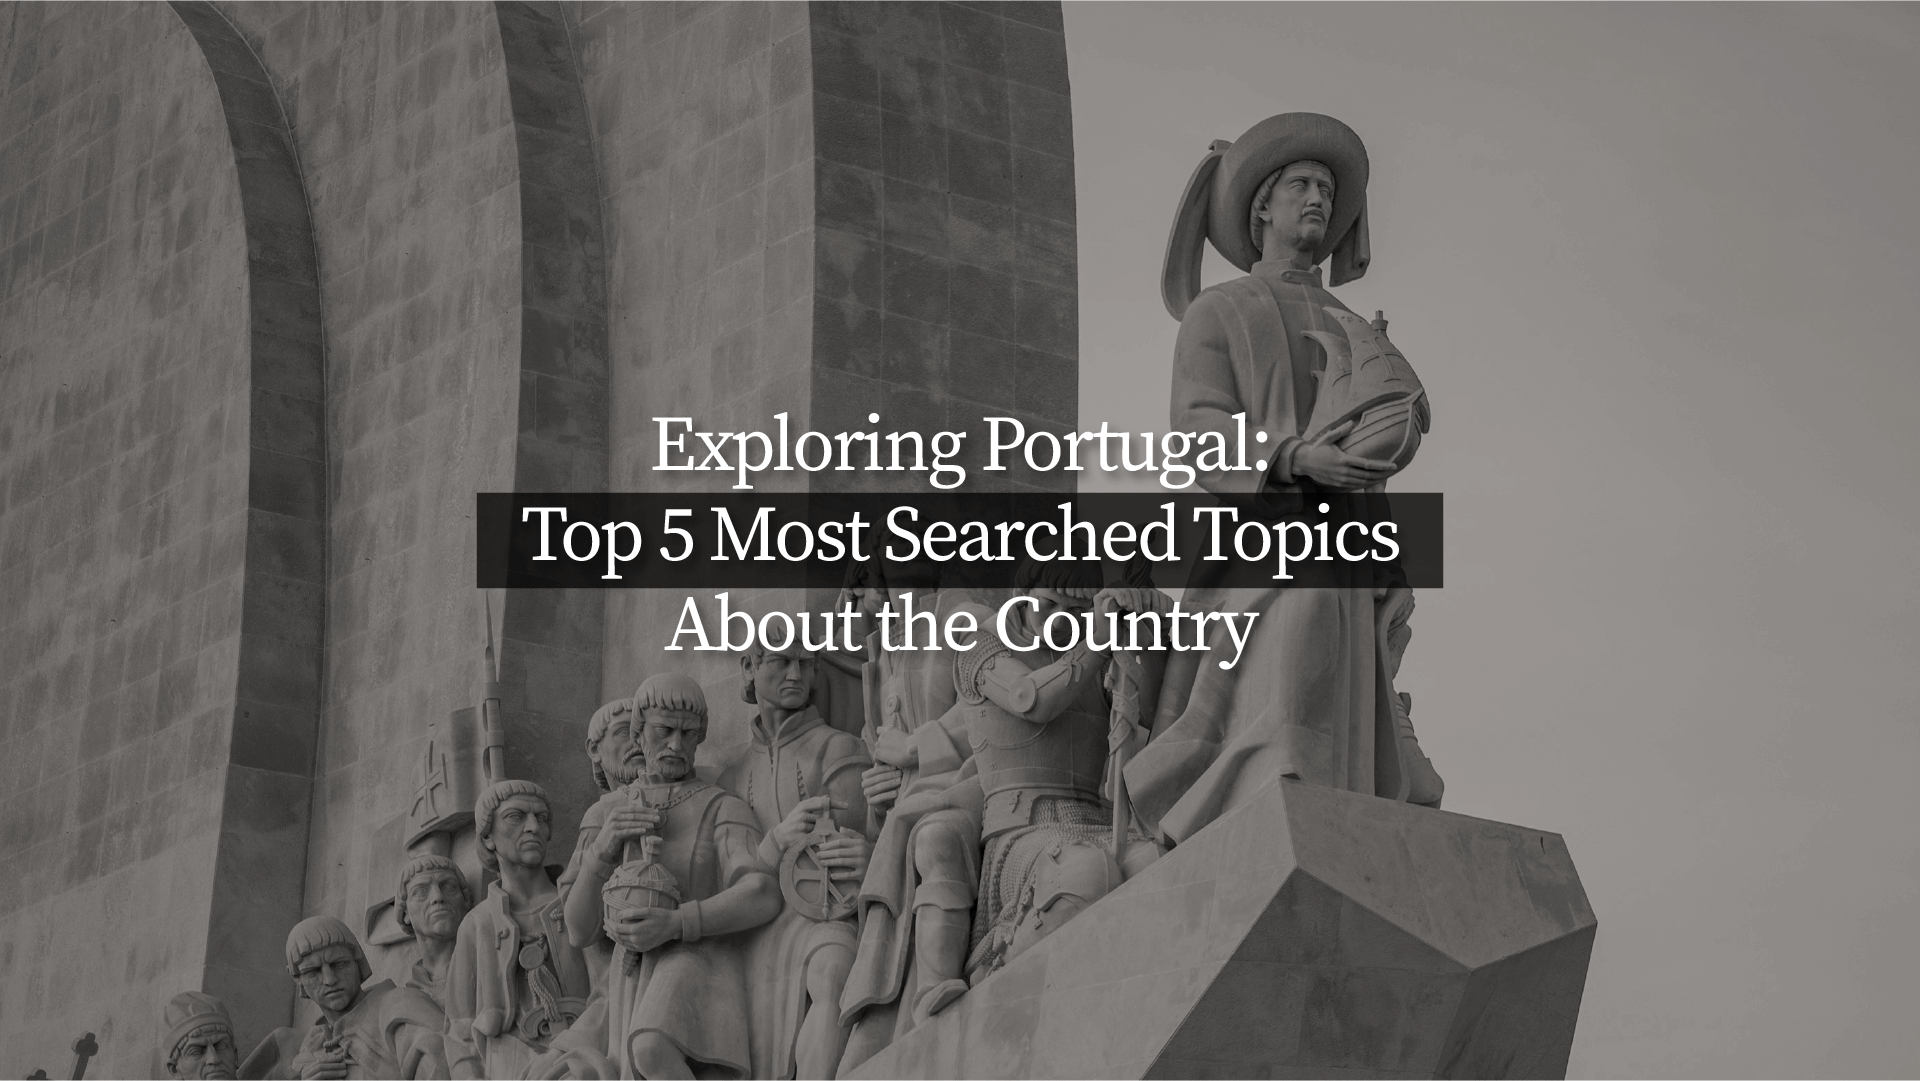 Top 5 Most Searched Topics About Portugal